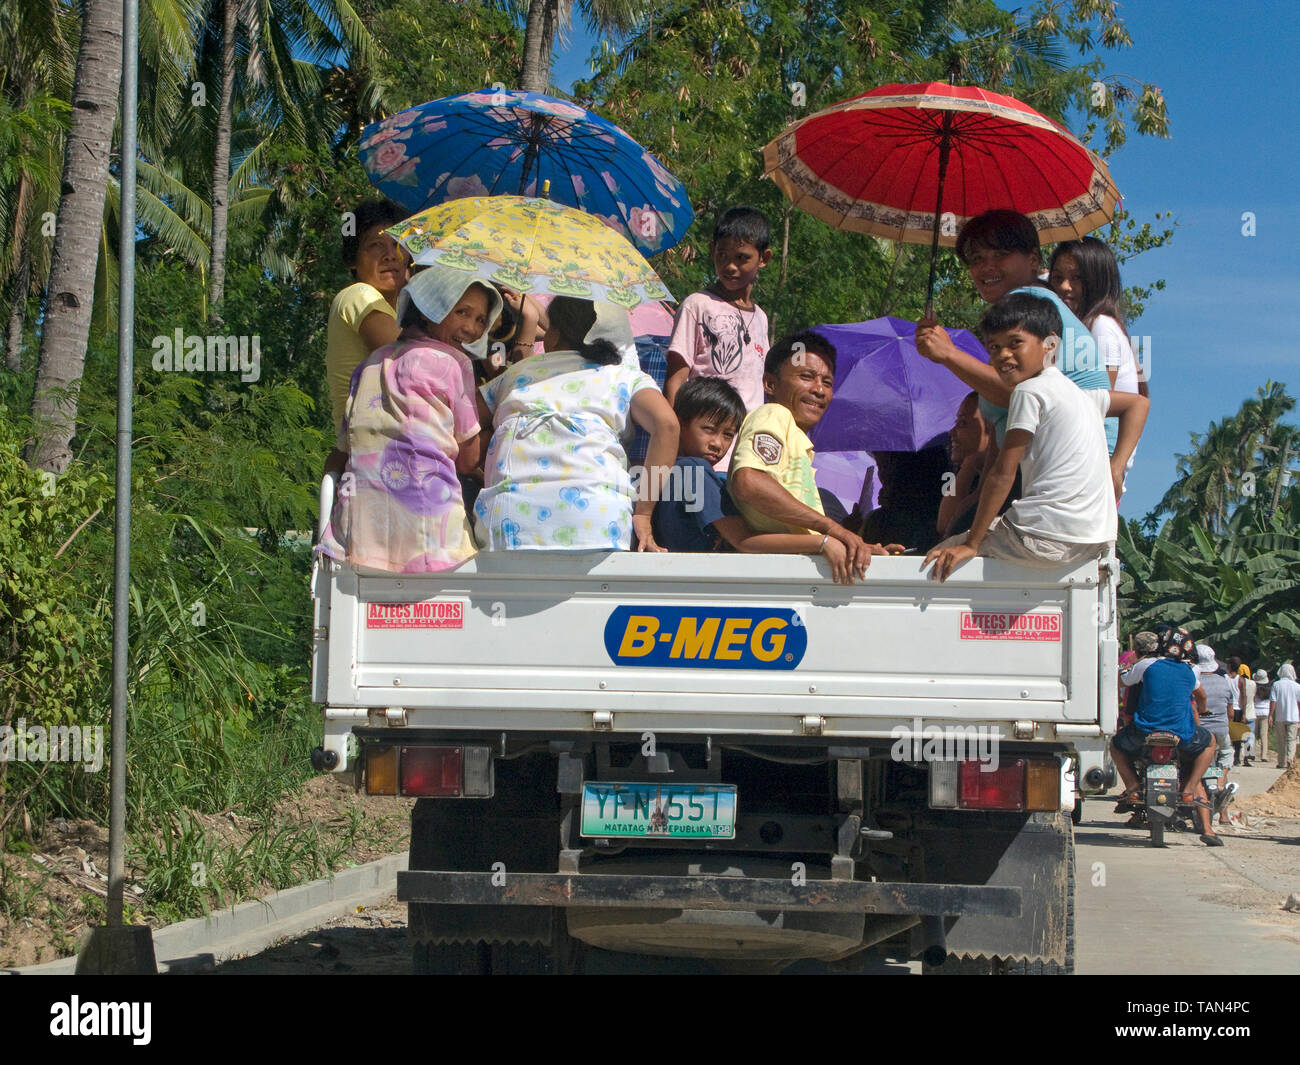 Locals on a truck, common public transportation in the Philippines, Moalboal, Cebu, Visayas, Philippines Stock Photo